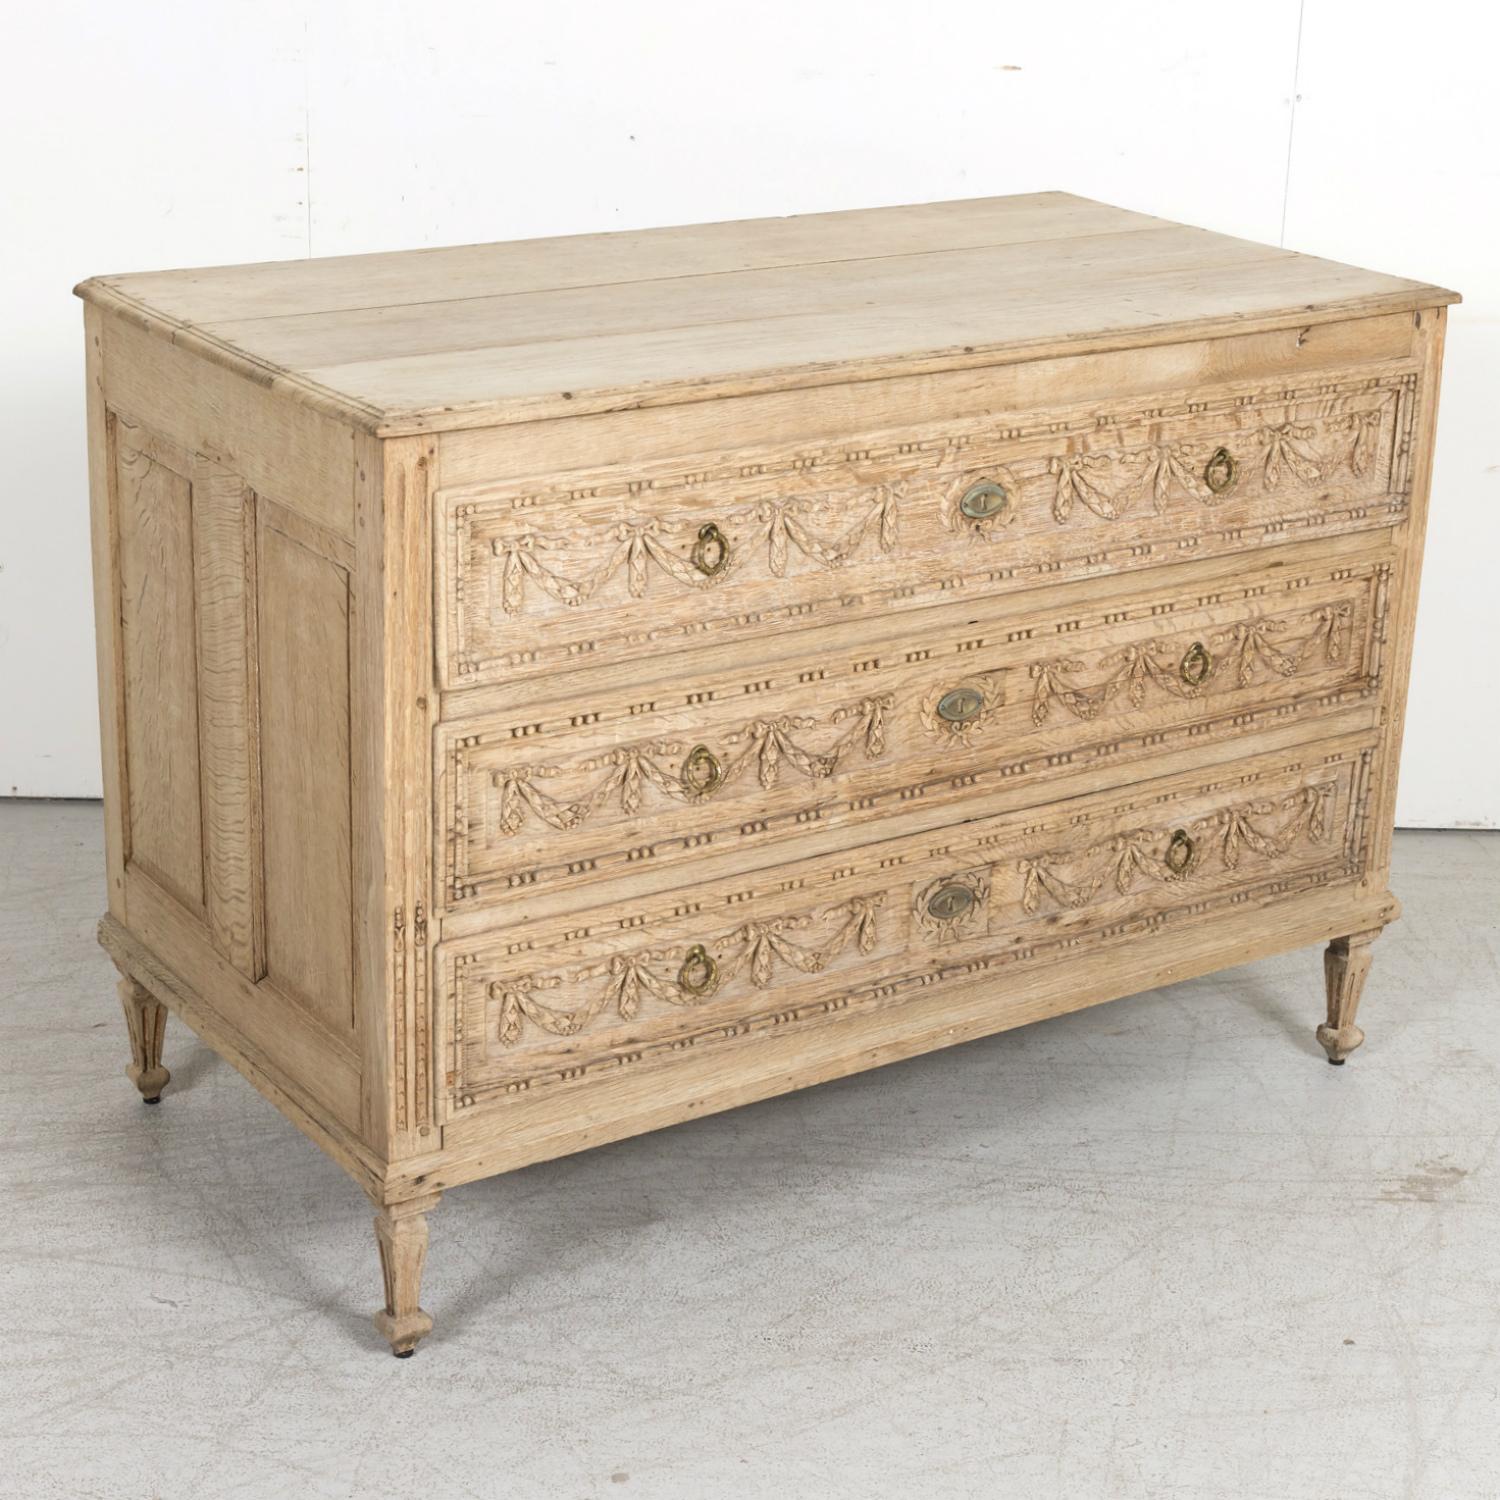 Early 19th Century French Louis XVI Style Bleached Oak Provençal Commode 13